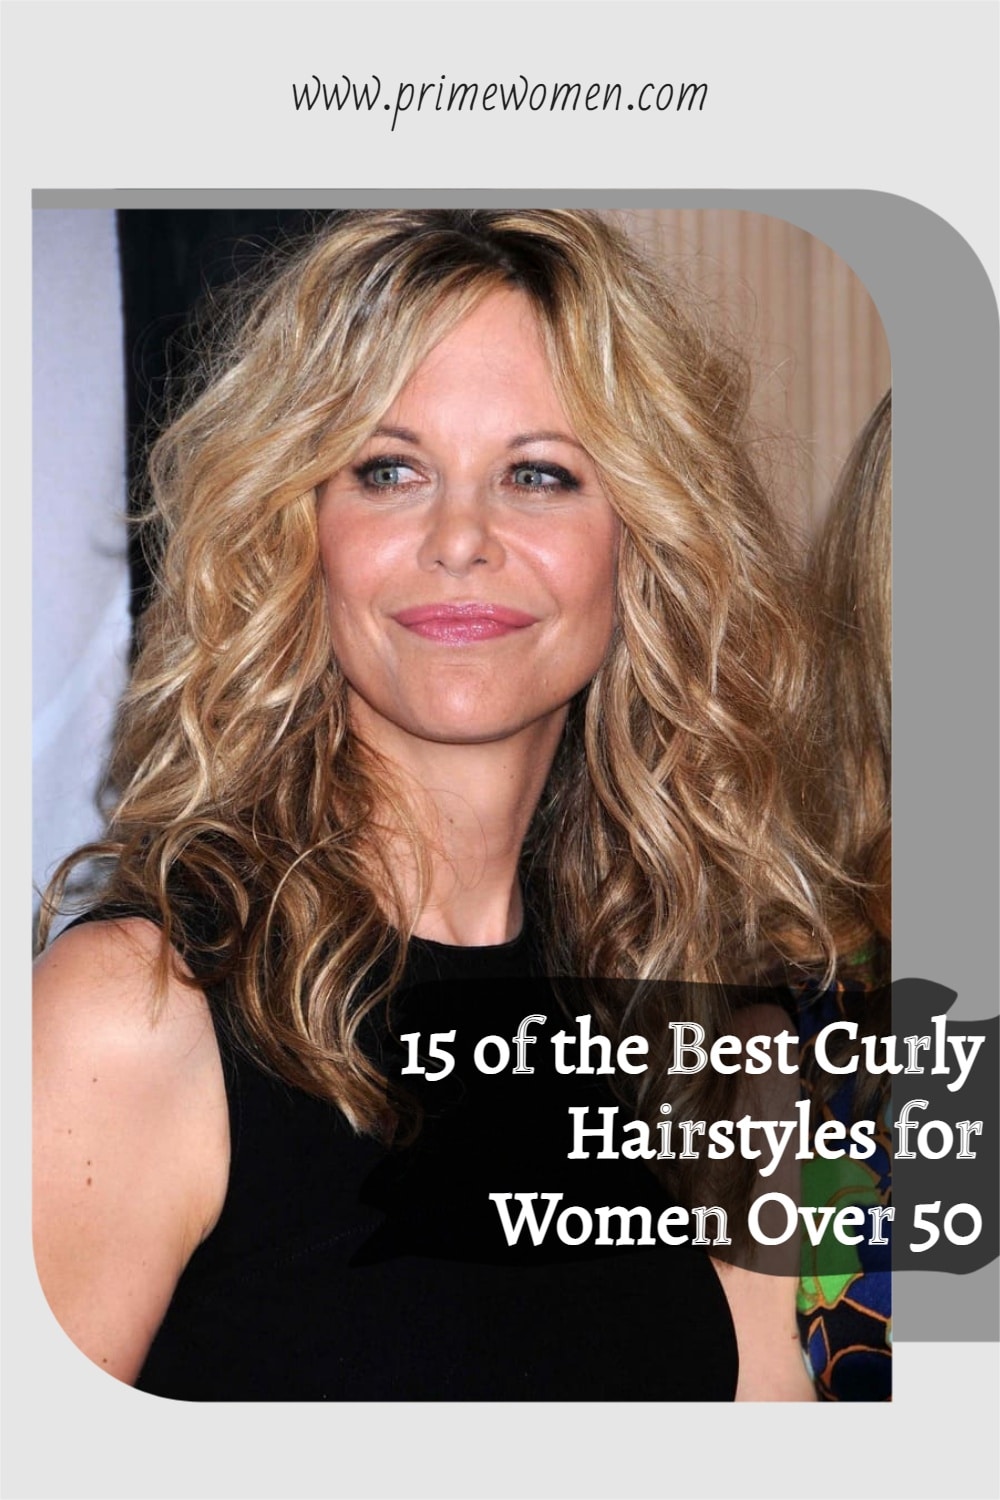 15-of-the-Best-Curly-Hairstyles-for-Women-Over-50